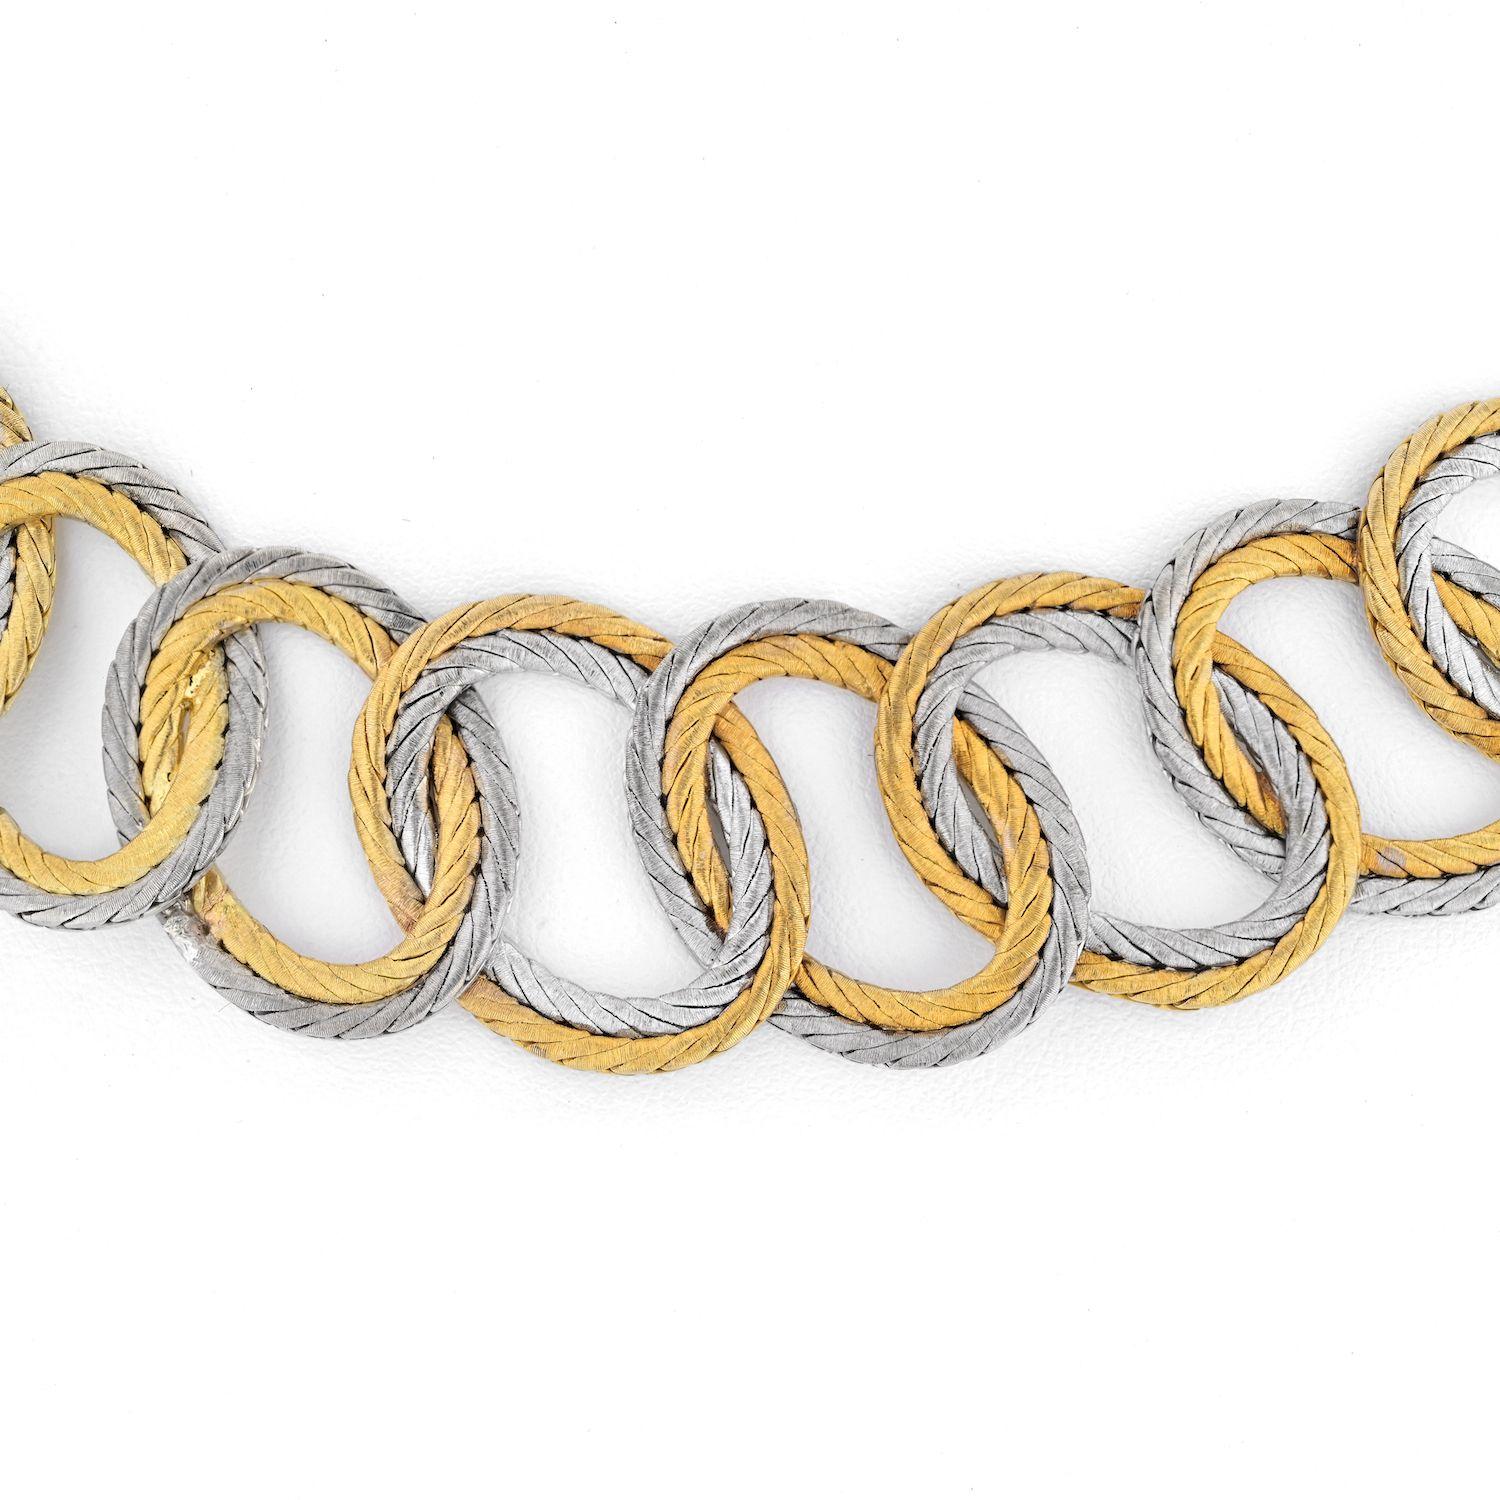 18K yellow gold and 18K white gold Buccellati collar necklace with push clasp closure and figure 8 safety.
Marks: 18K, 750, Designer Signature, Registered Trademark Number, ITALY
Measurements: 
Fits as a choker. 
15 inches.  
